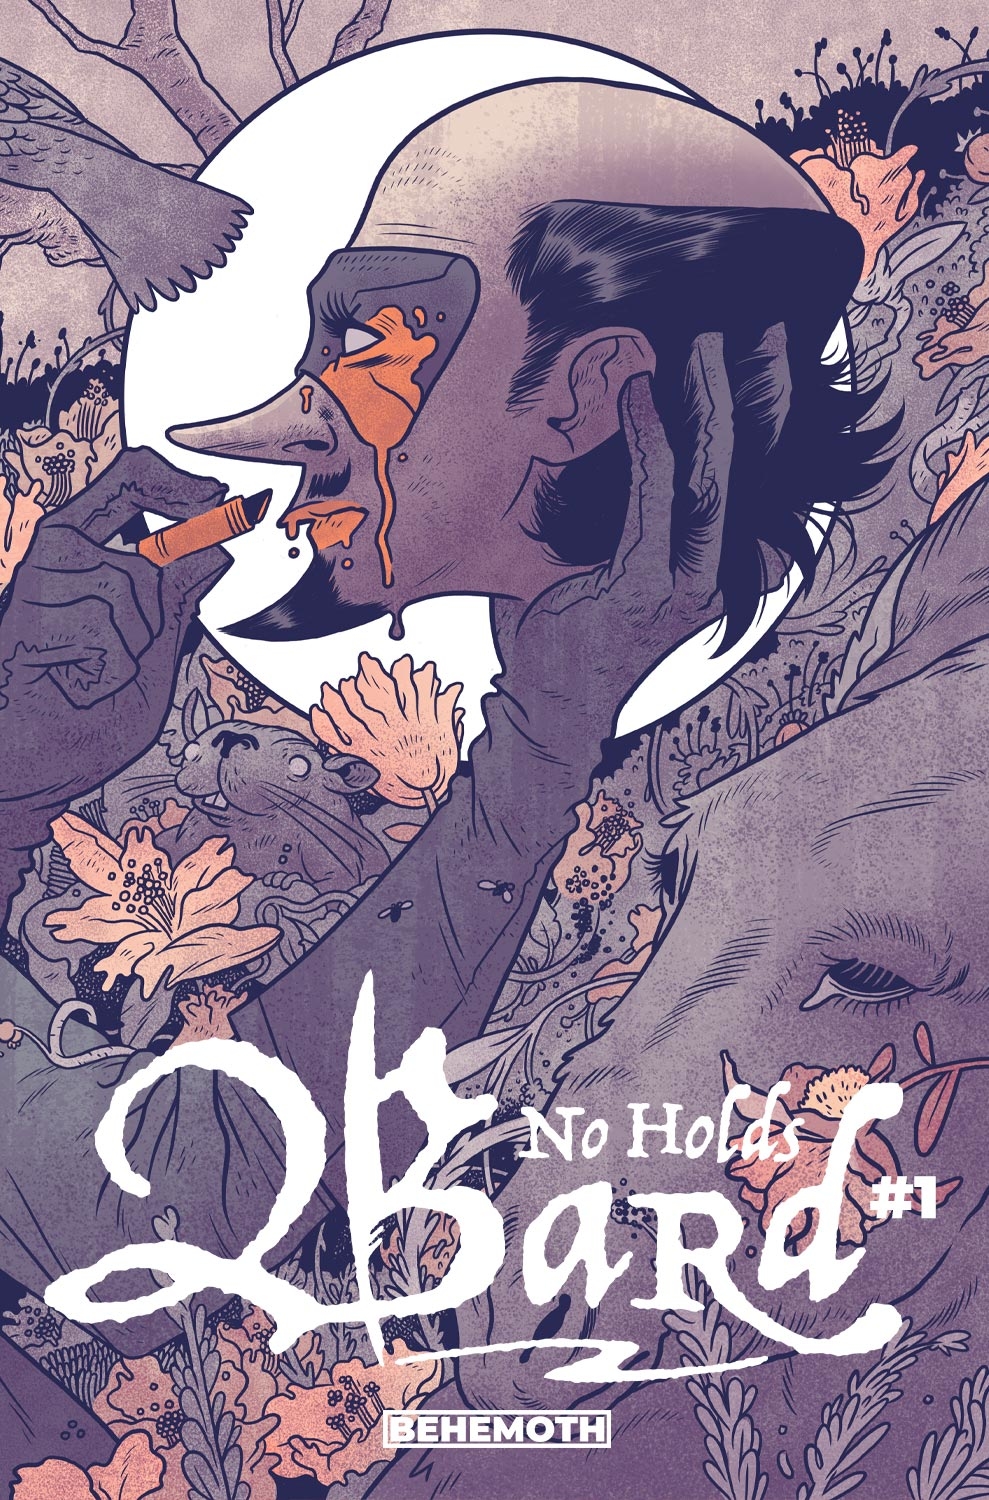 No Holds Bard #1 Cover A Faerber (Mature) (Of 4)